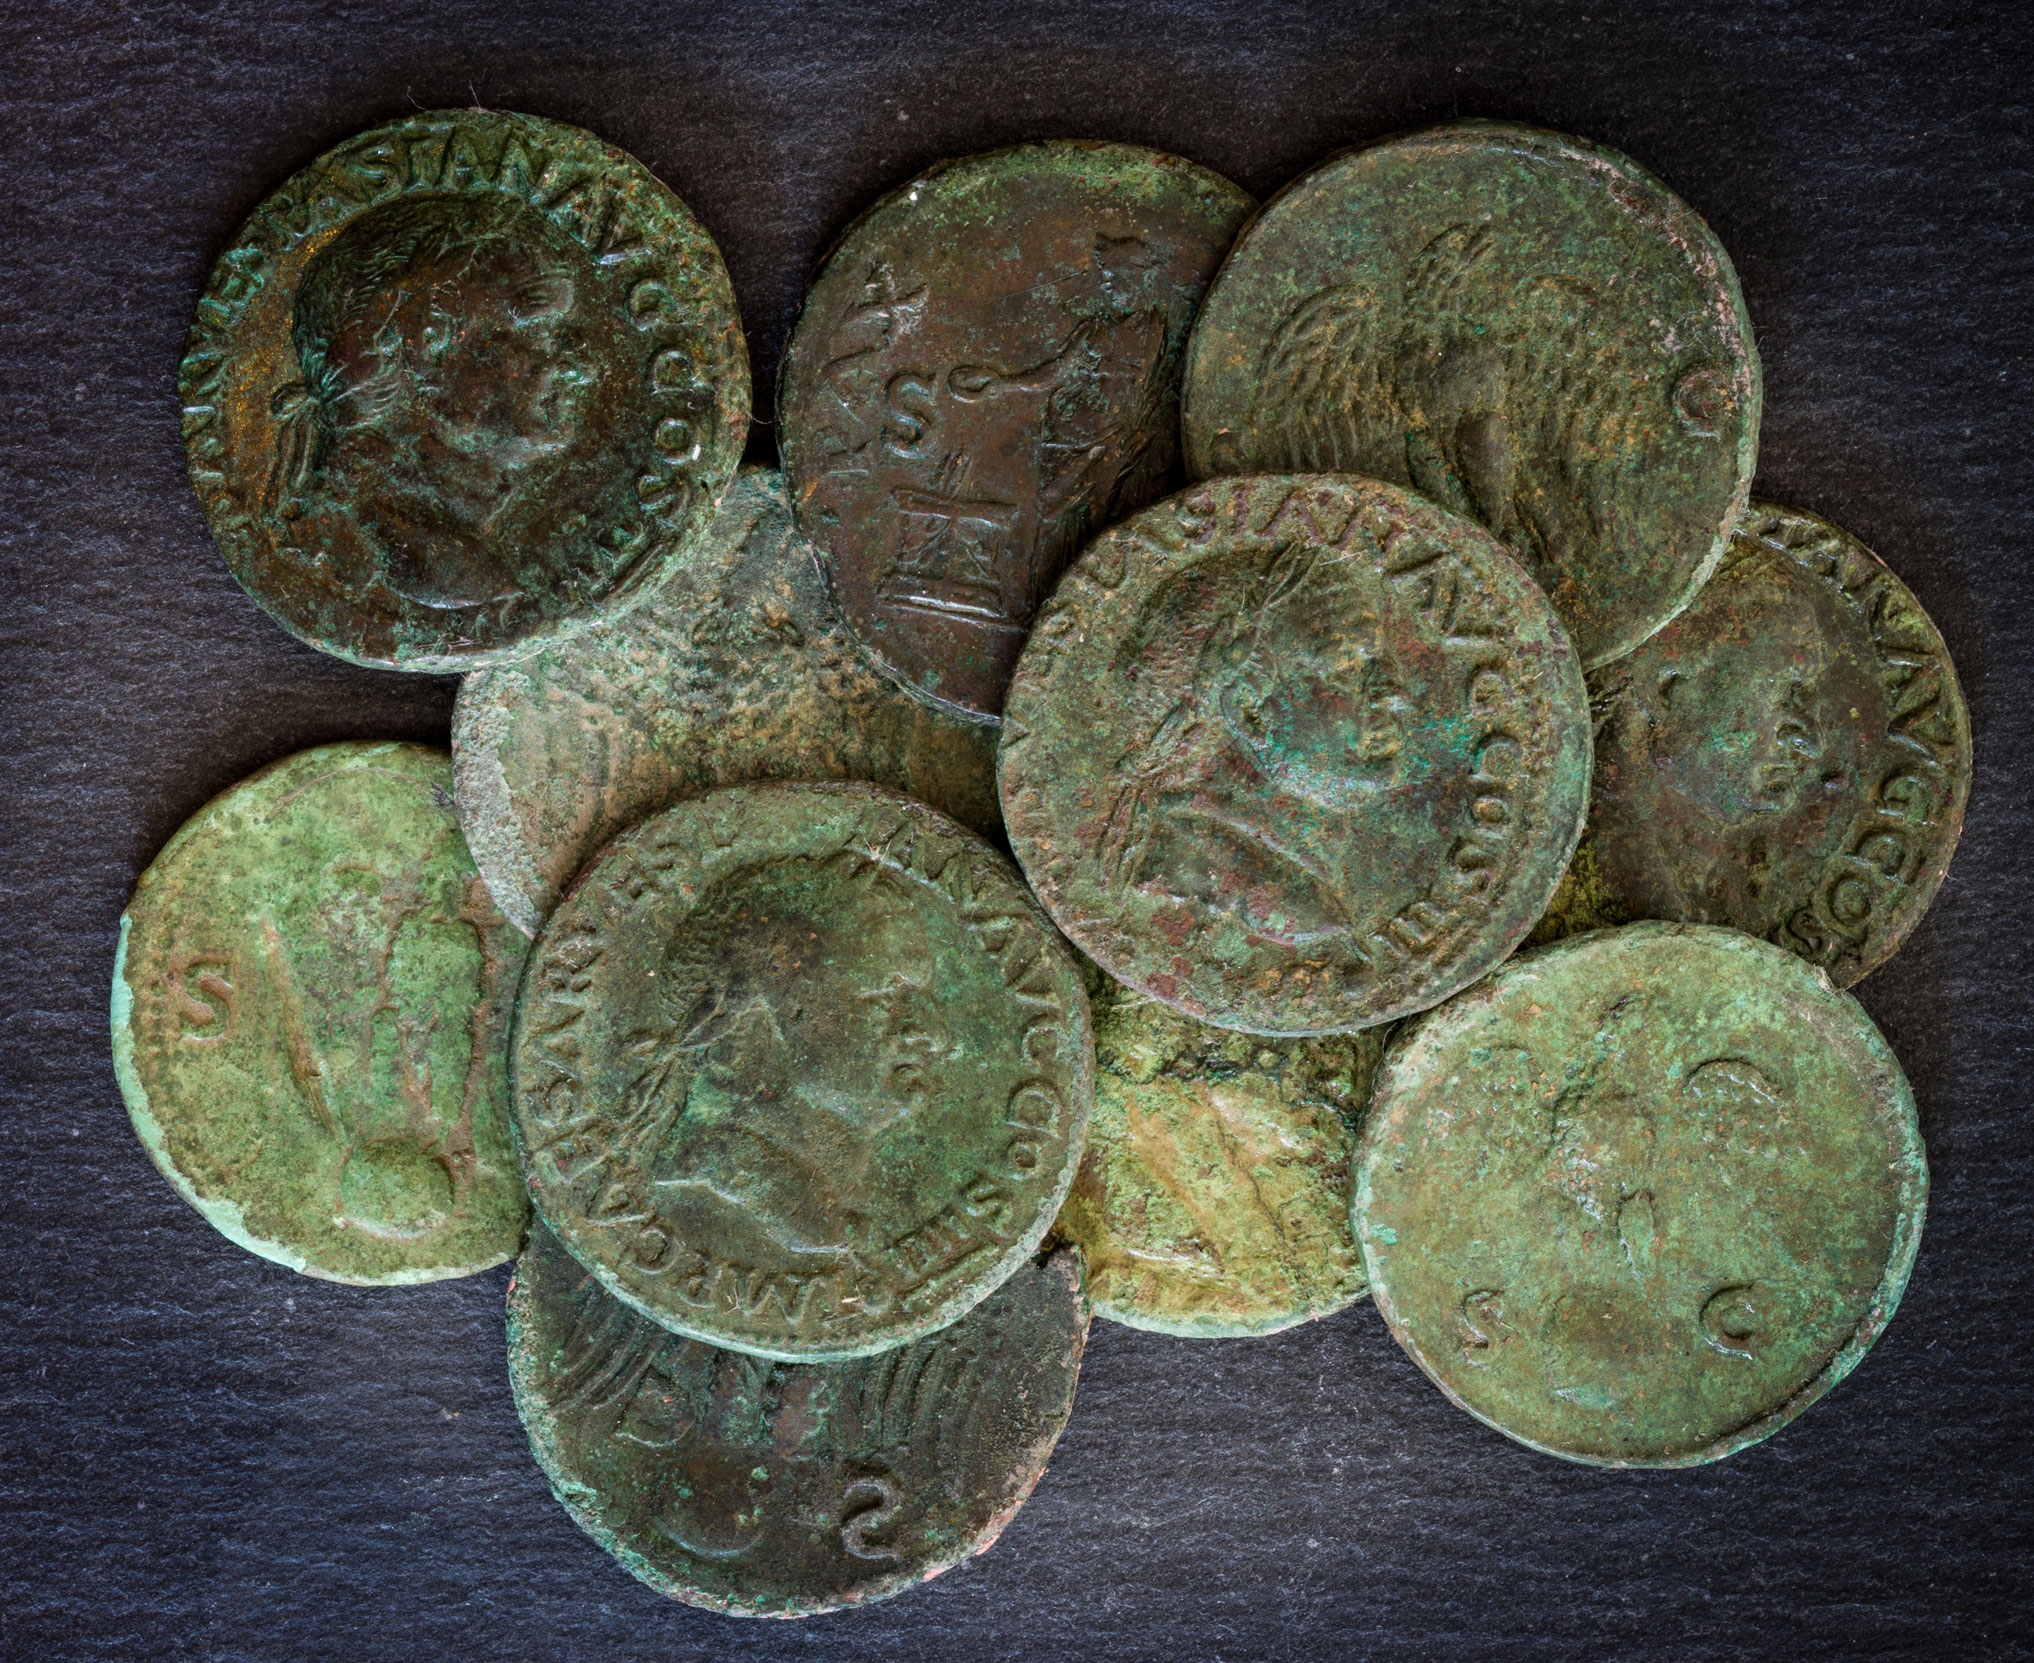 A selection of coins including those bearing the name of the Roman emperor Vespasian.